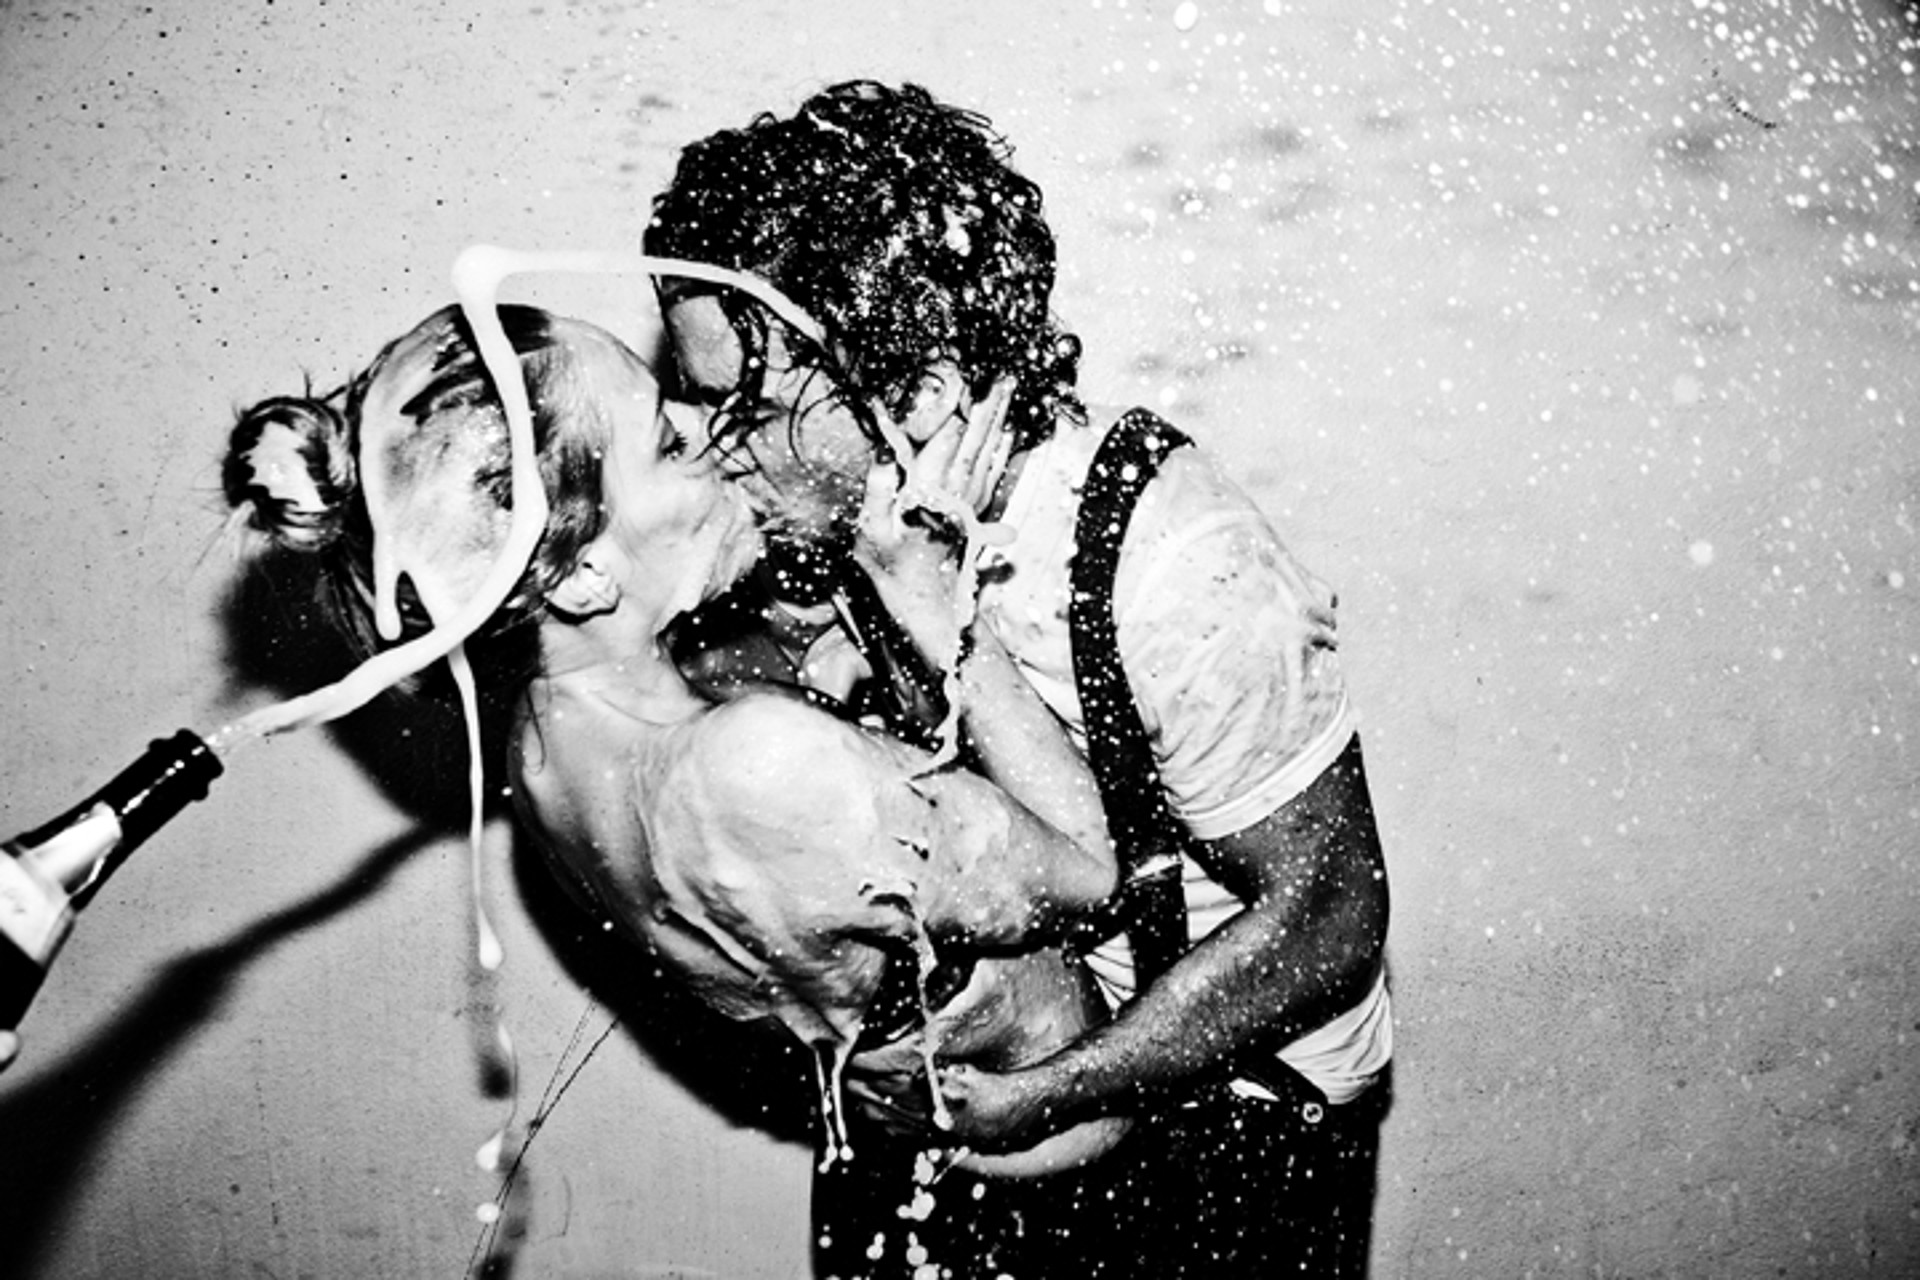 Champagne Kiss (Damaged - Need to Destroy) by Tyler Shields